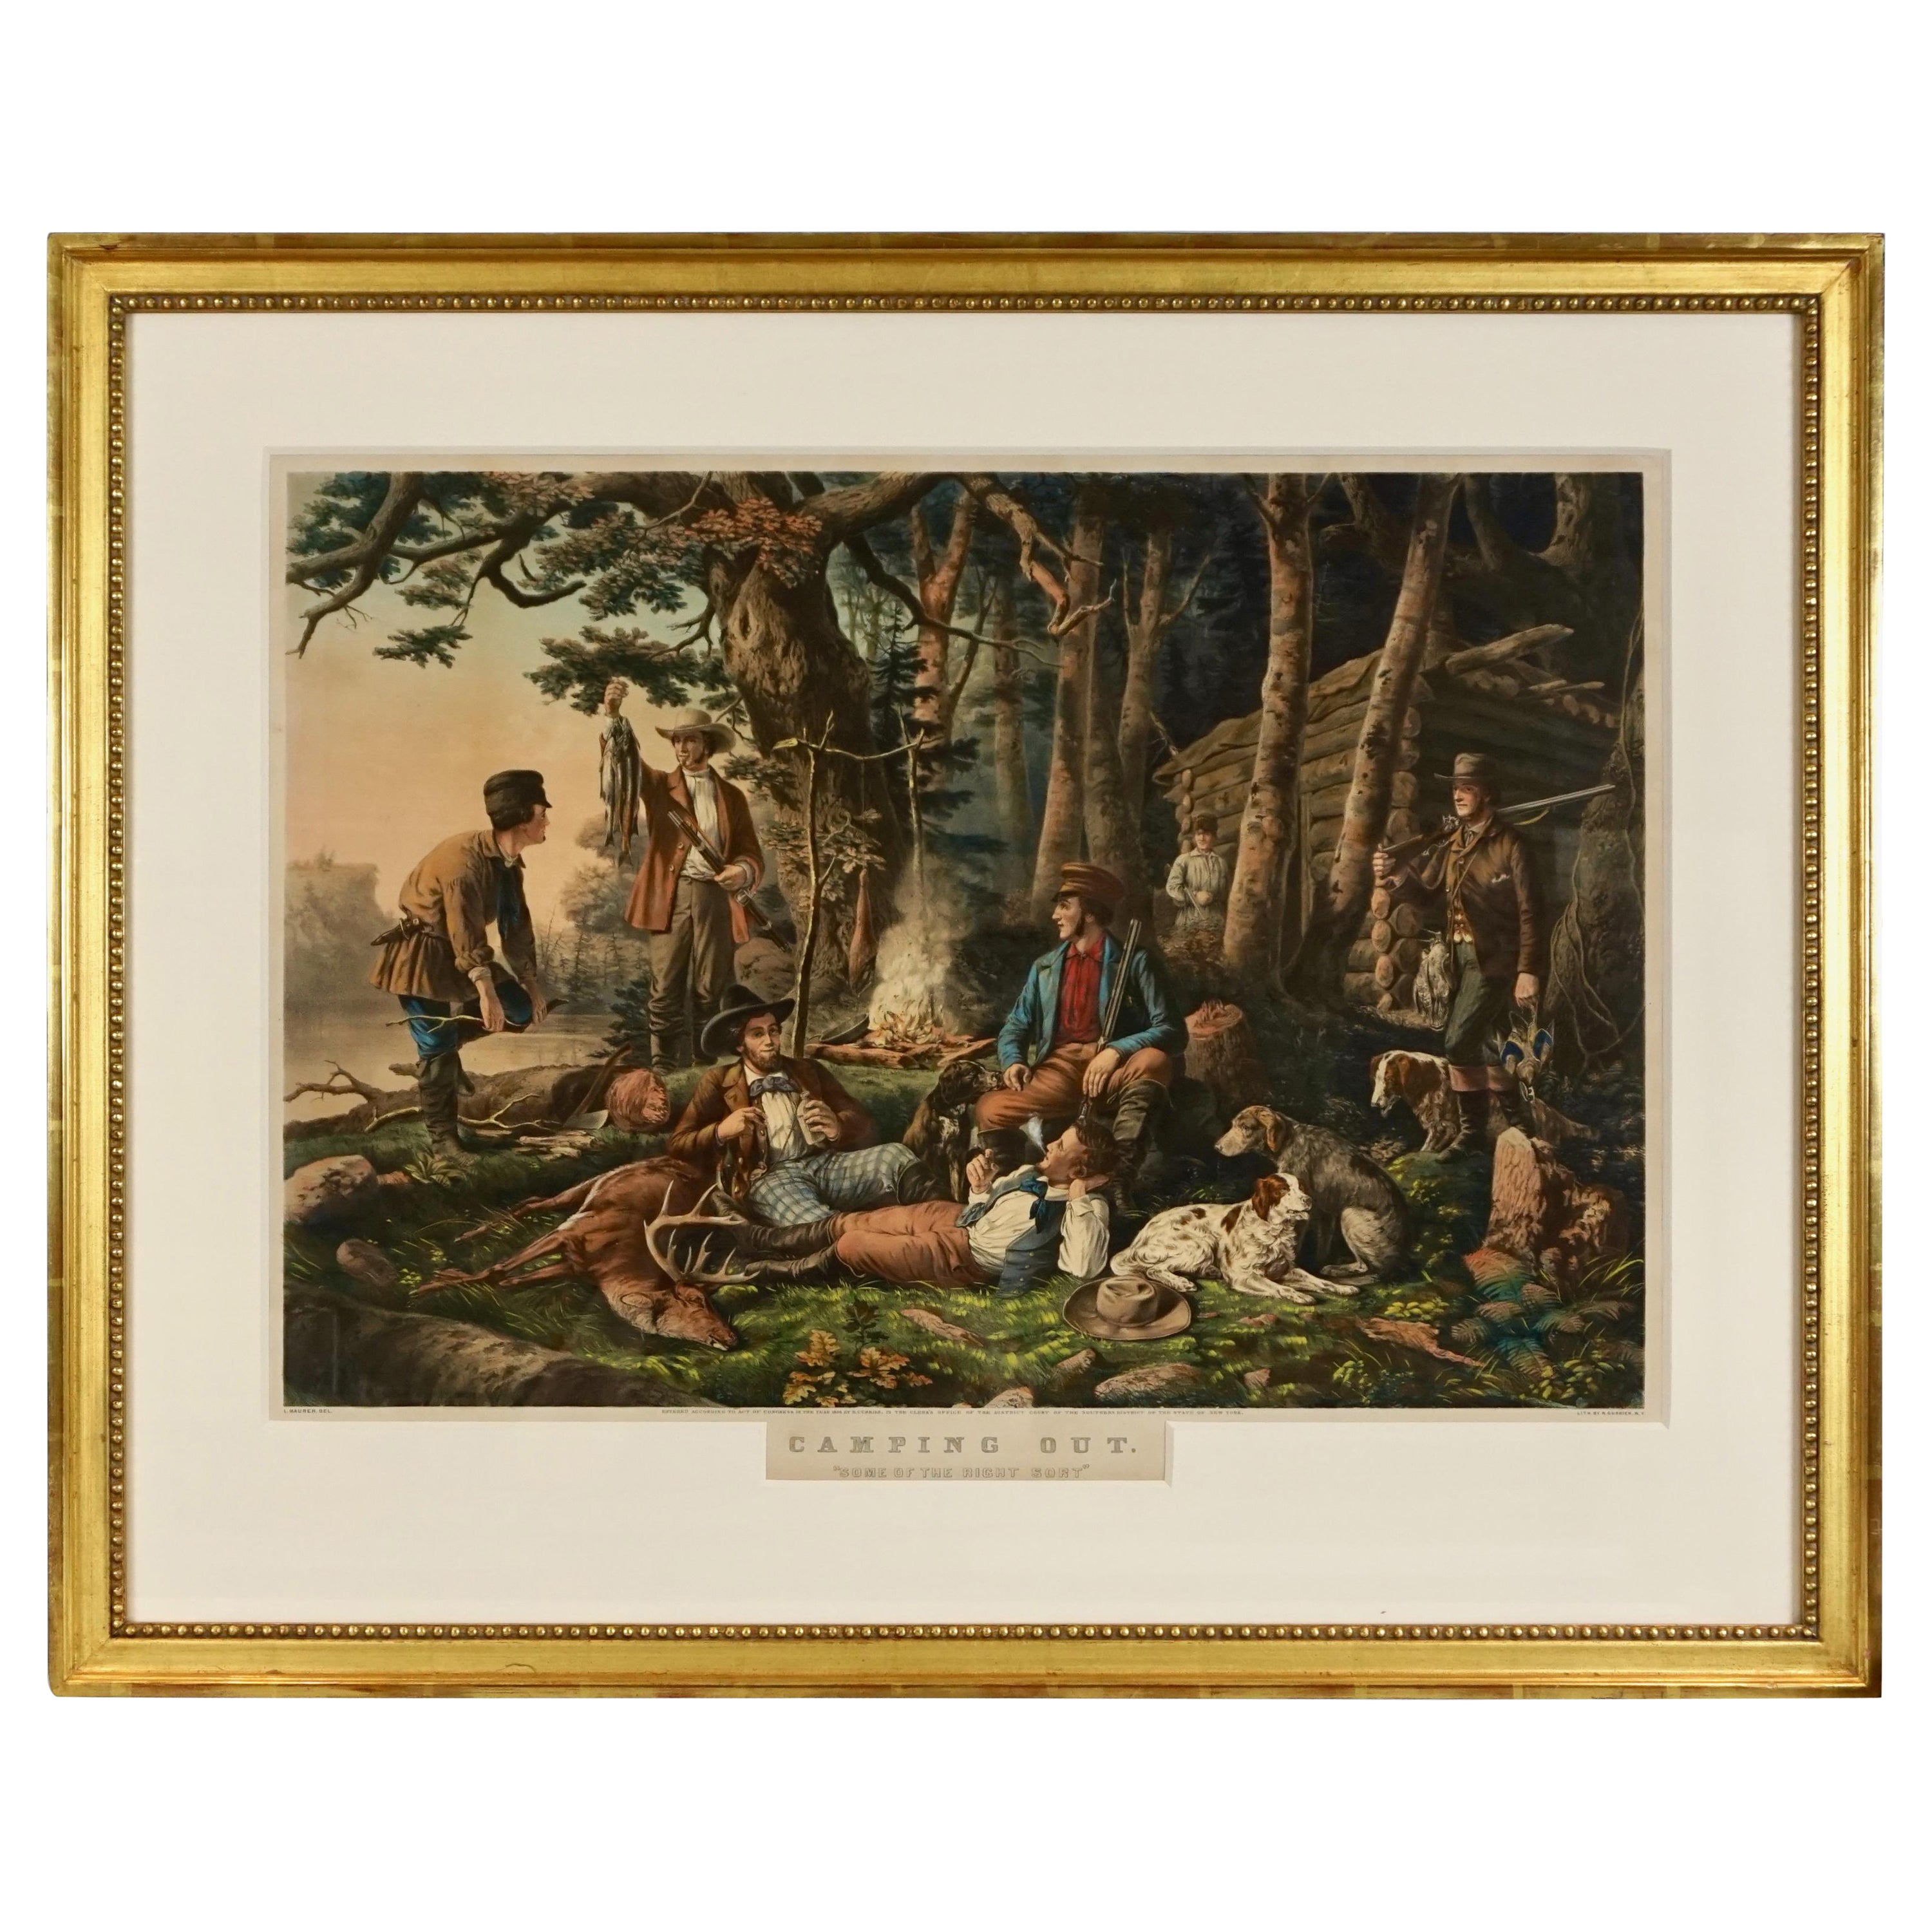 A large folio hand colored lithograph by Nathaniel Currier (1813-1888) and James Merritt Ives (1824-1895) titled 